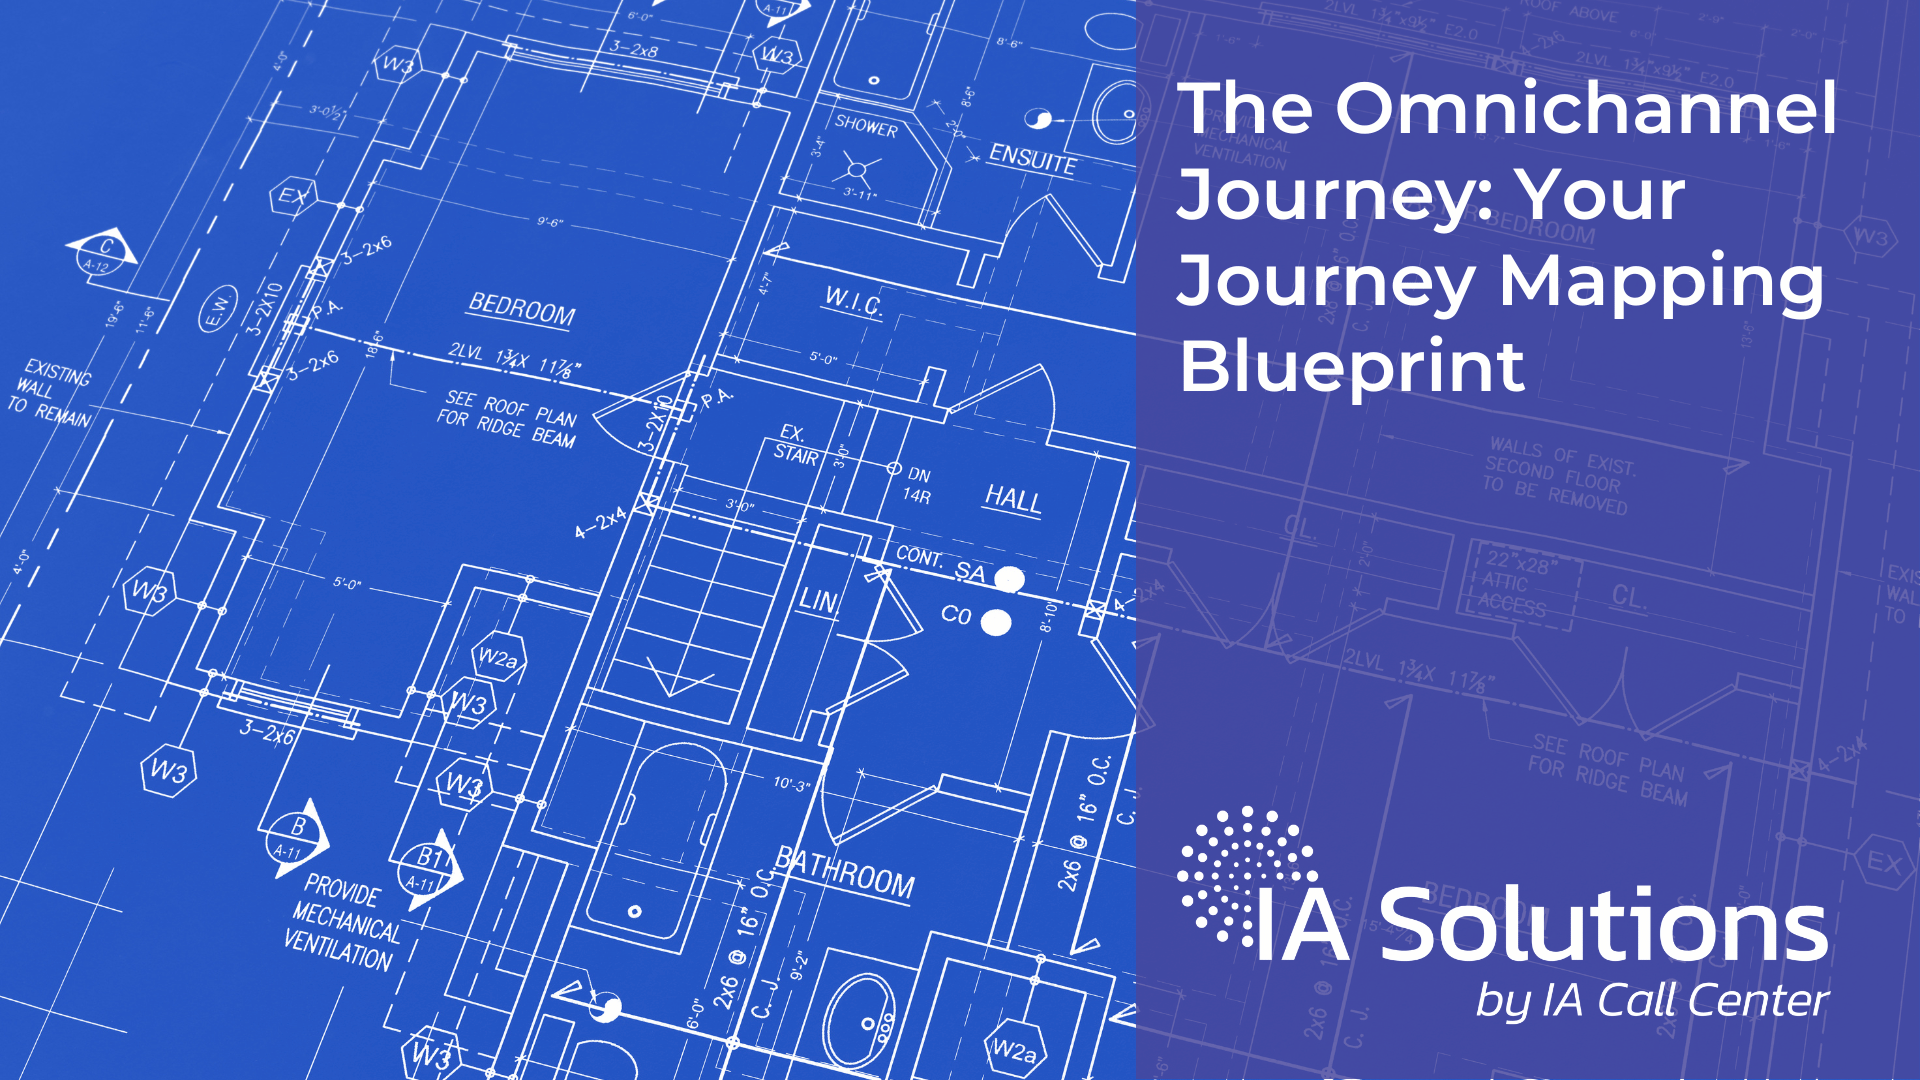 The Omnichannel Journey Your Journey Mapping Blueprint Featured Image